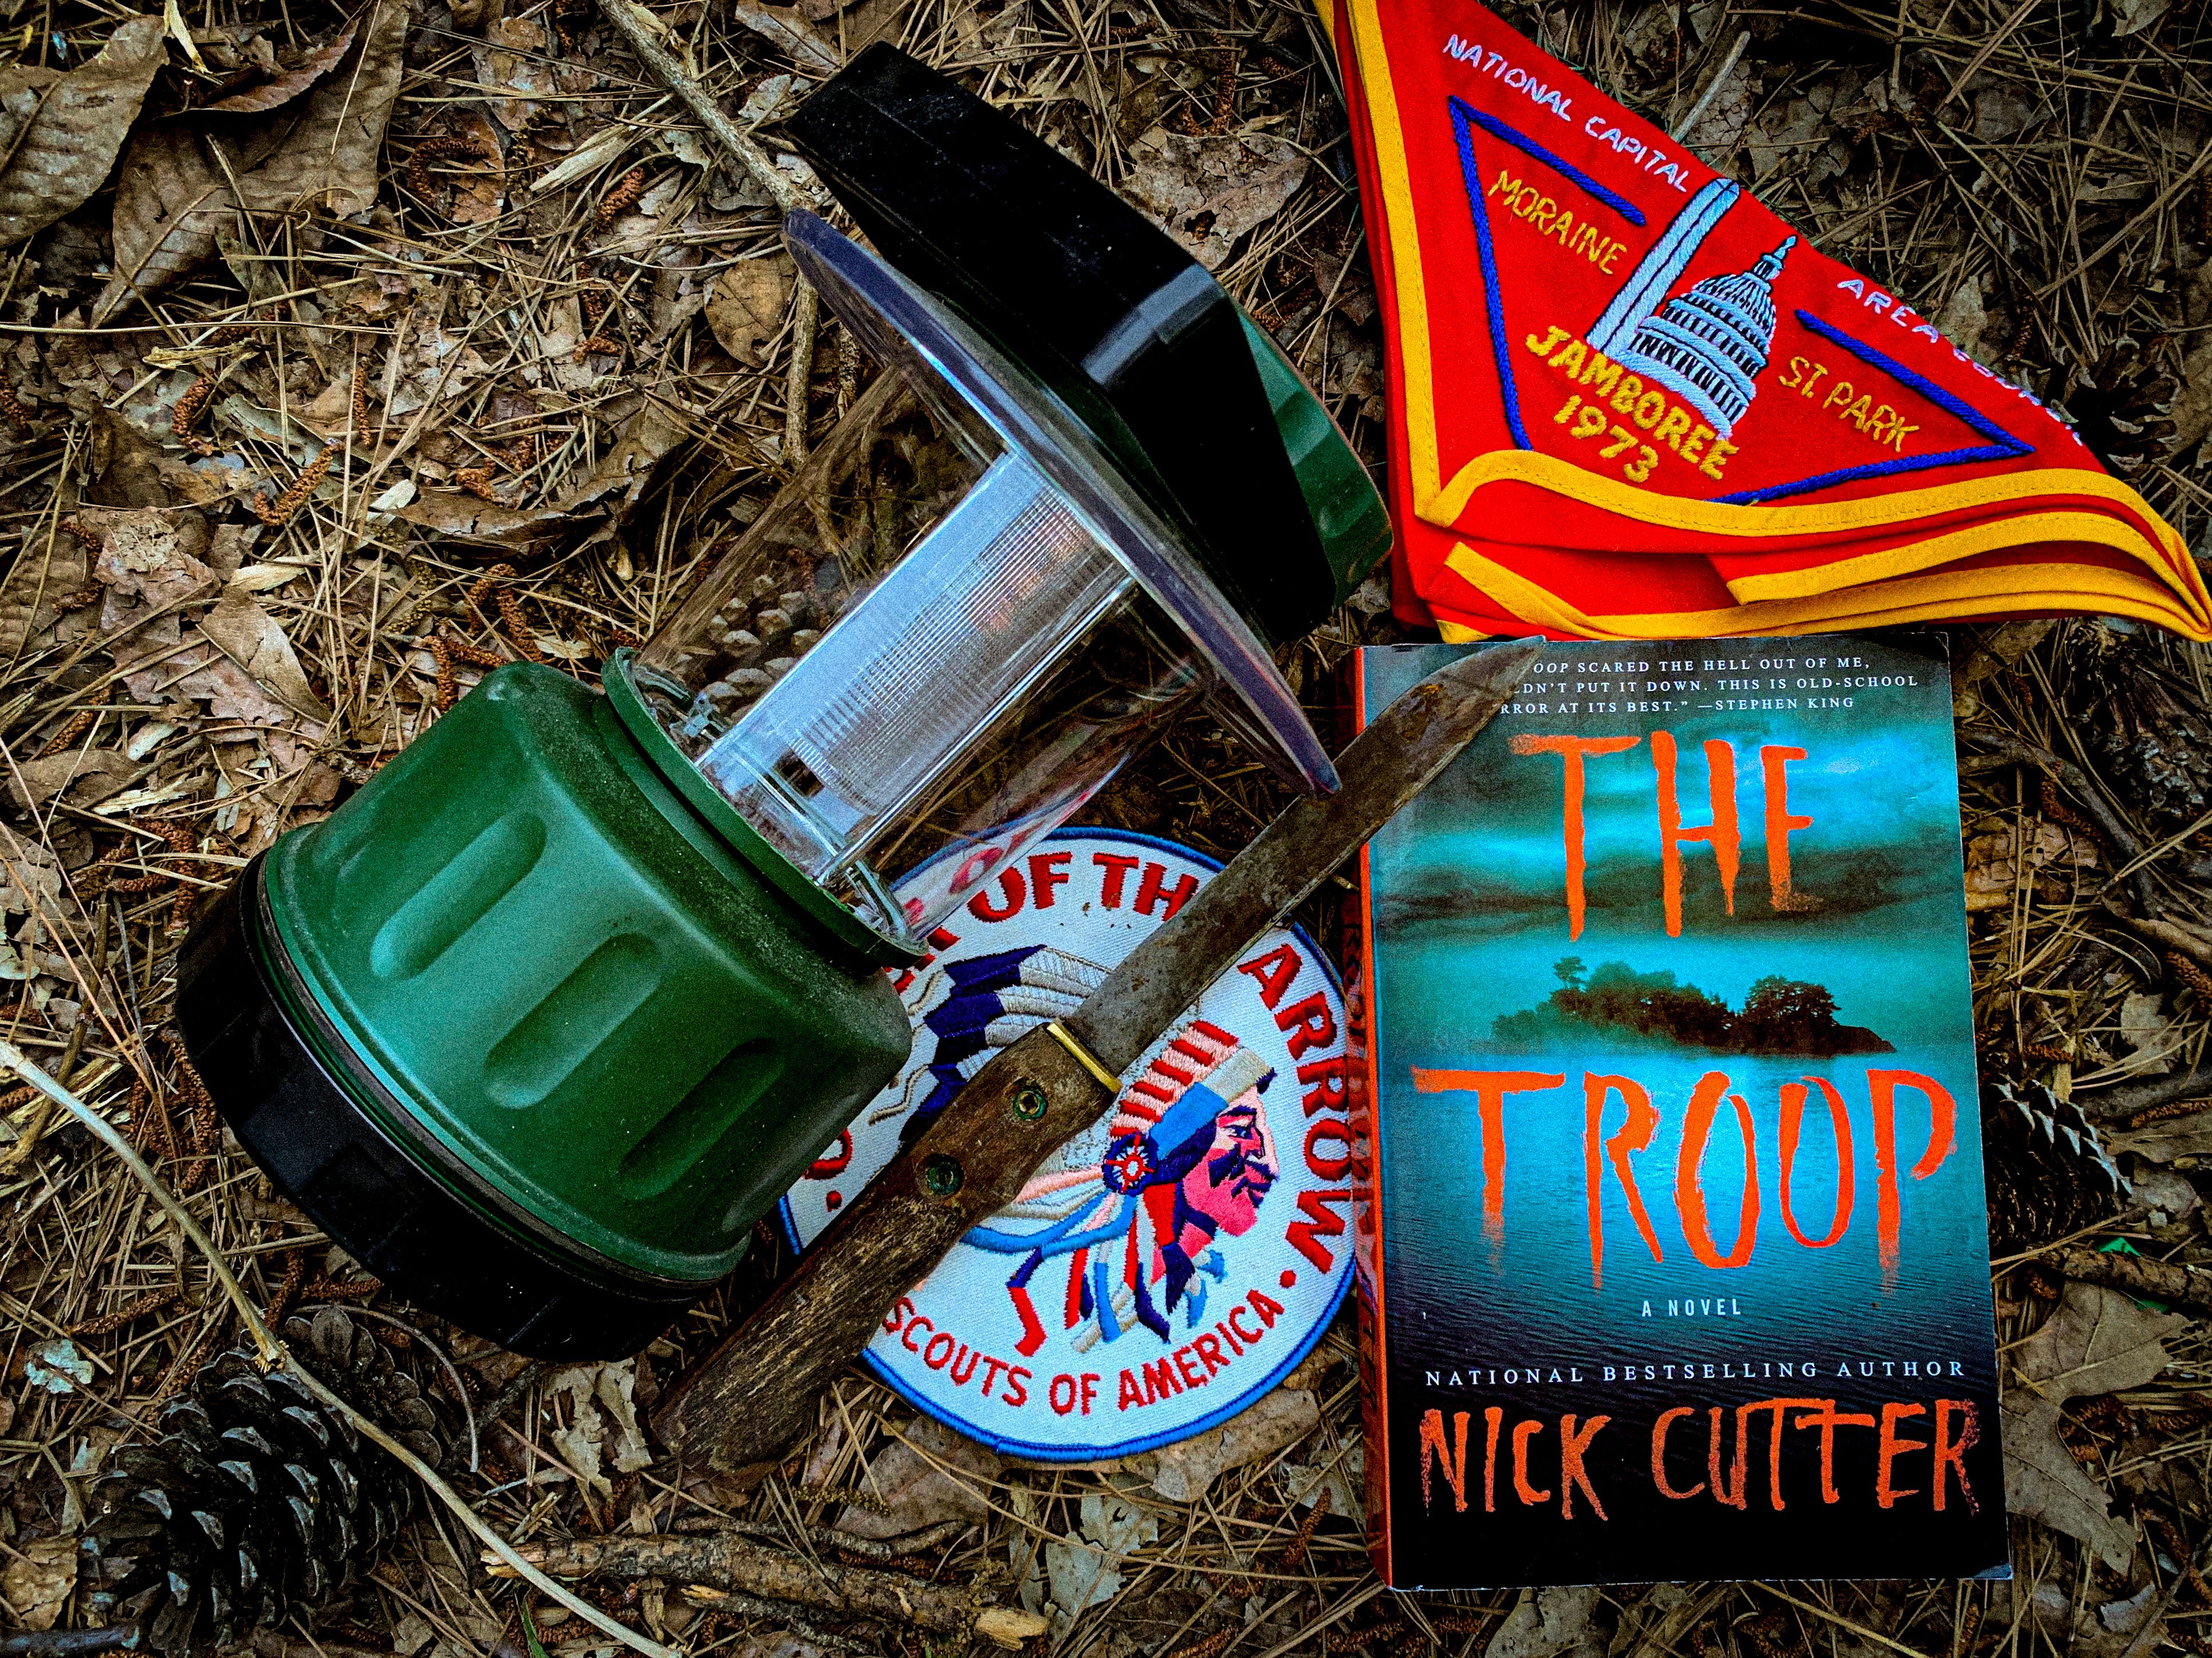 Horror Hypothesis Book Review- THE TROOP by Nick Cutter